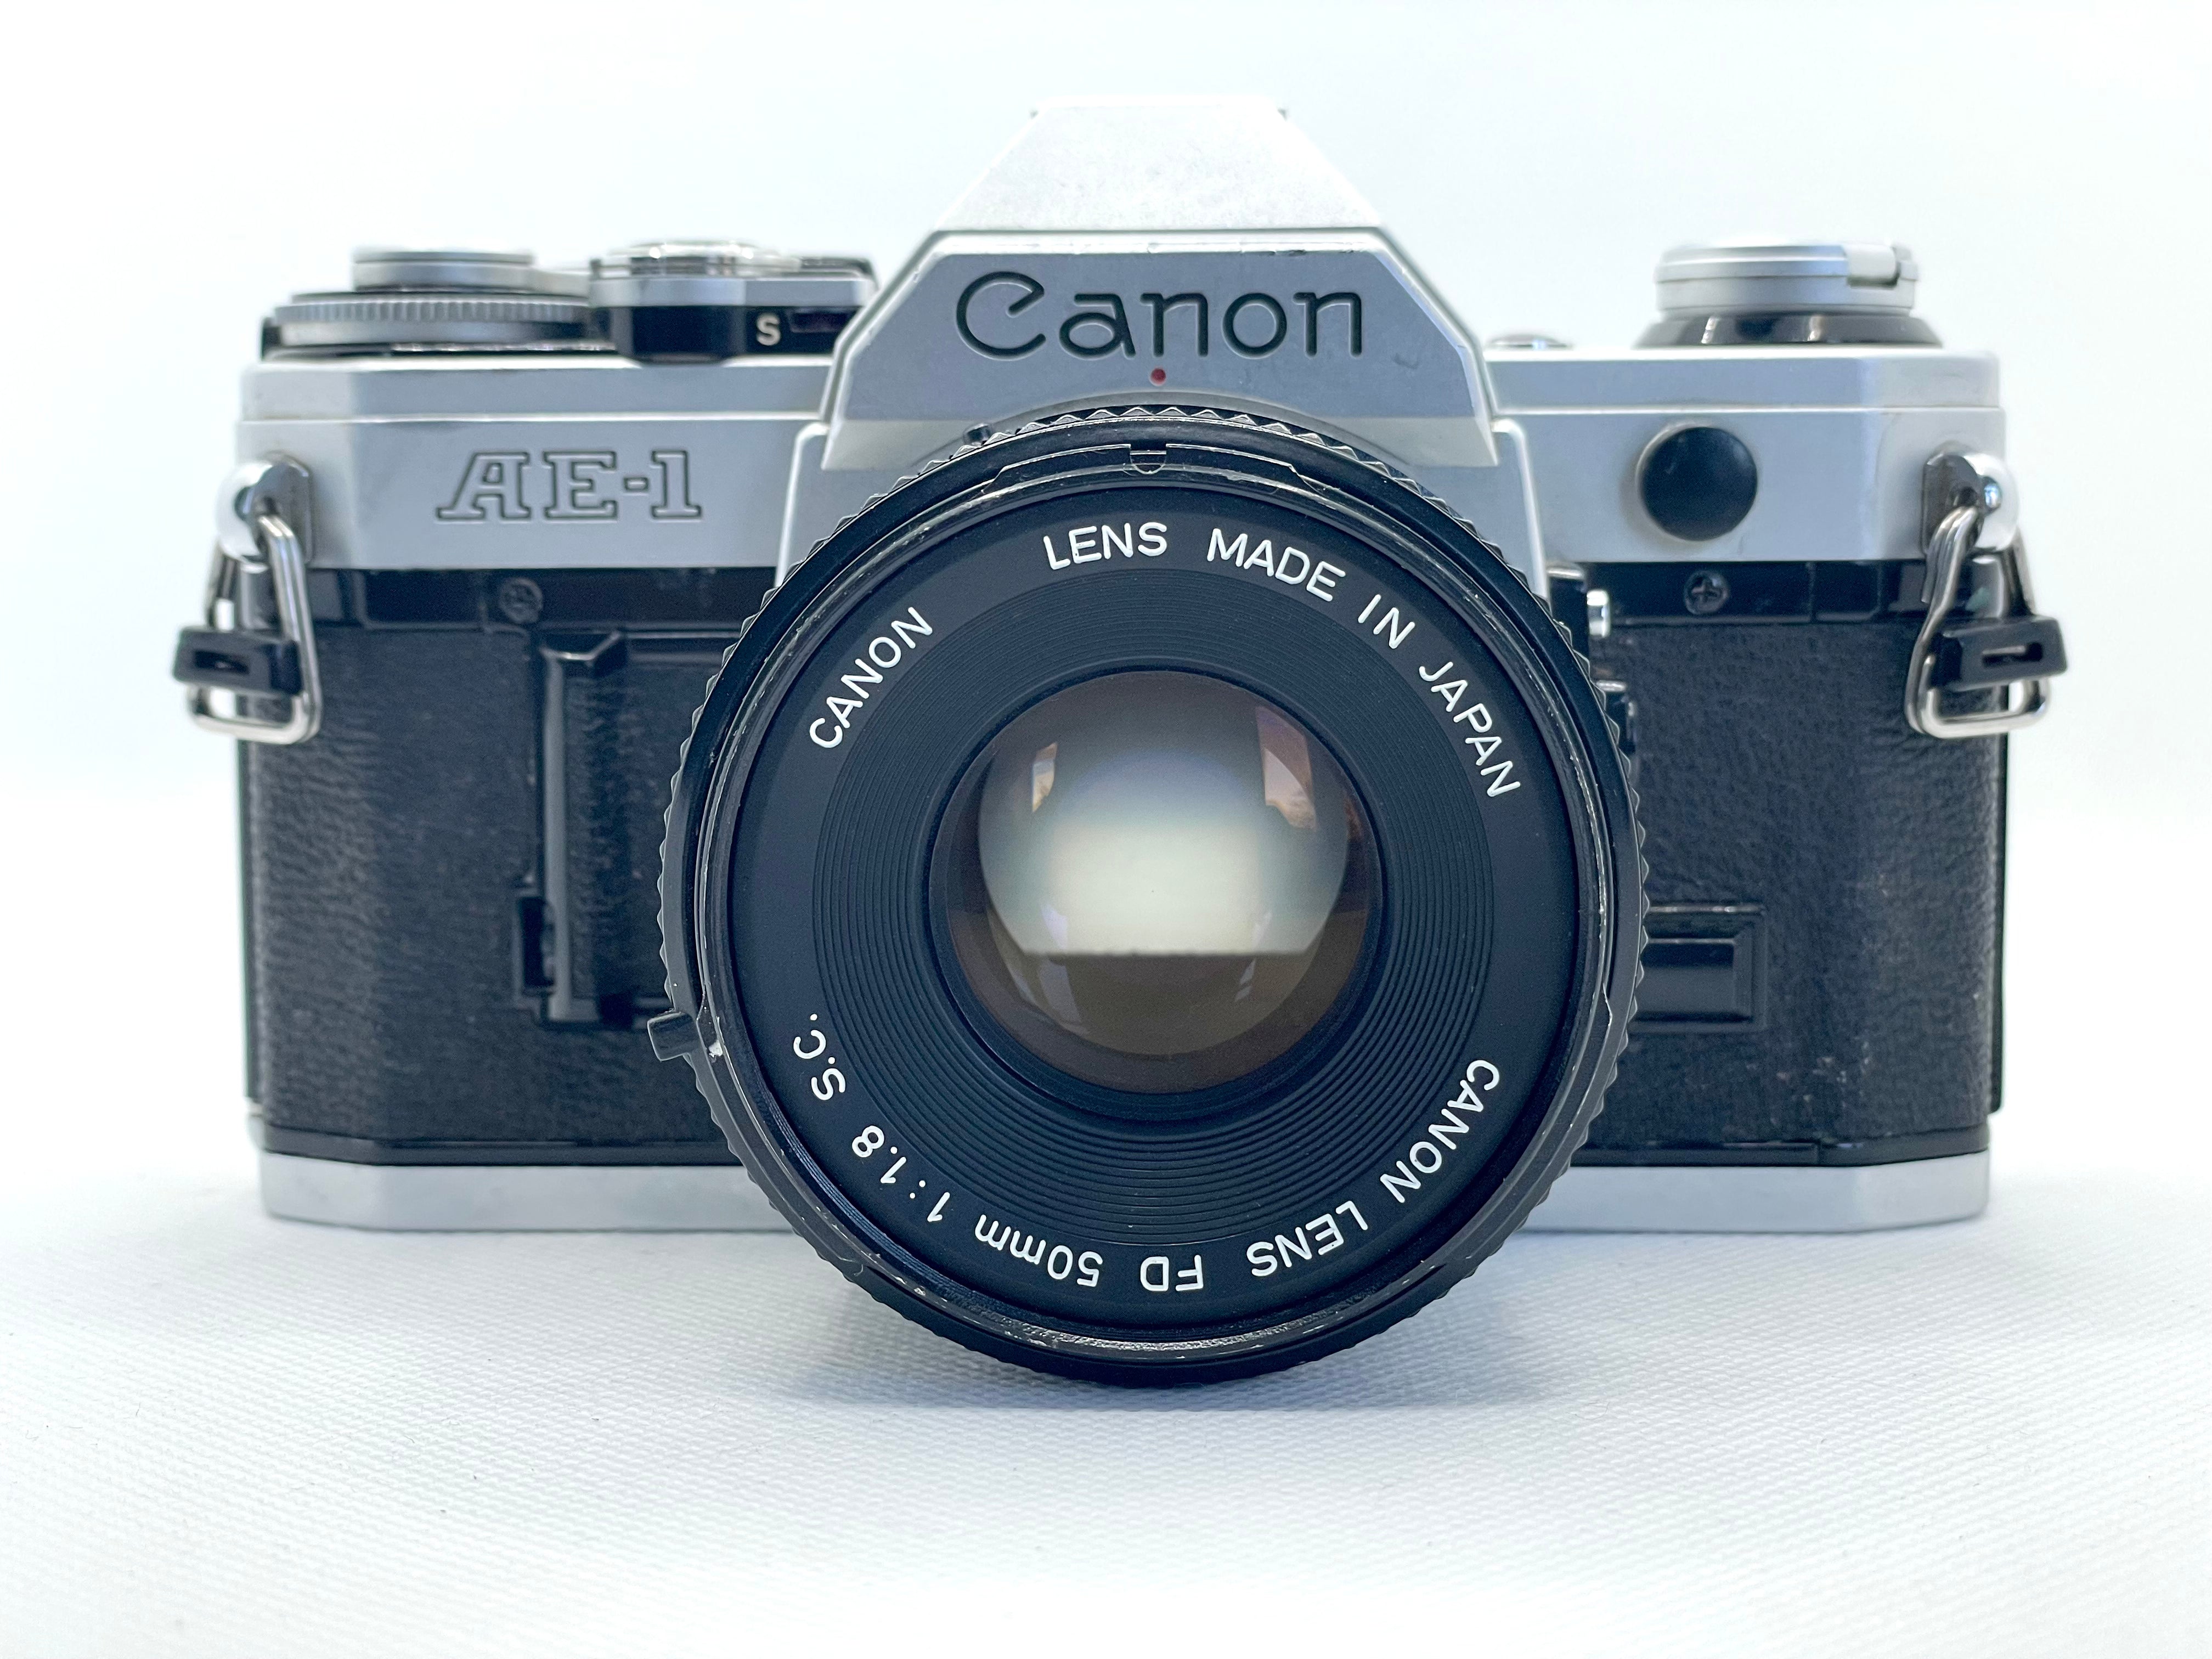 Canon AE-1 with 50mm 1.8